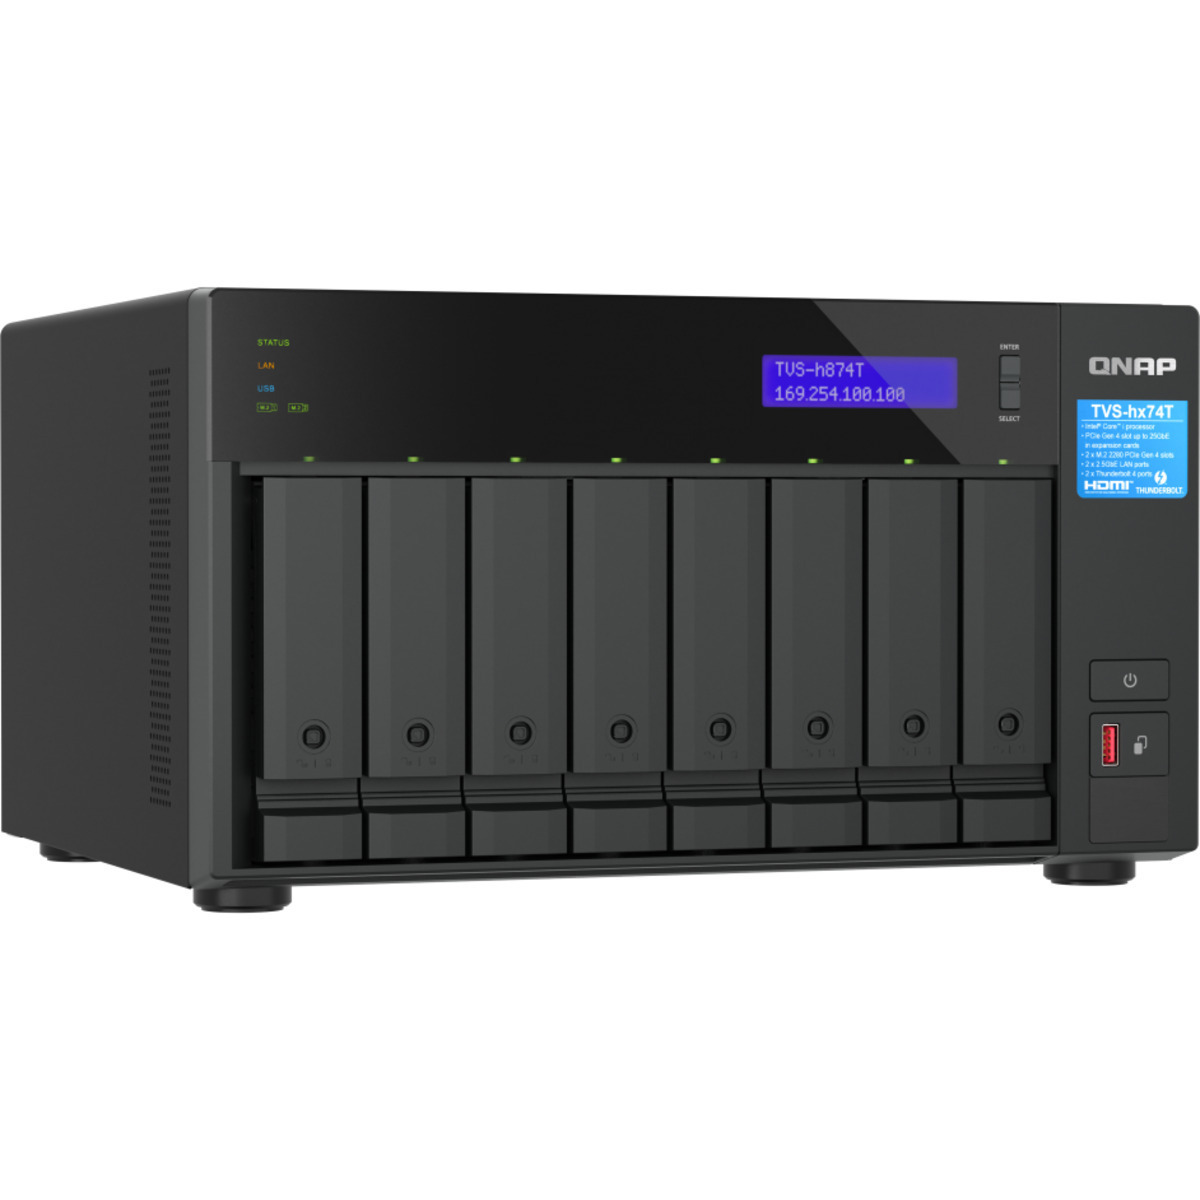 buy QNAP TVS-h874T Core i9 Thunderbolt 4 176tb Desktop DAS-NAS - Combo Direct + Network Storage Device 8x22000gb Seagate IronWolf Pro ST22000NT001 3.5 7200rpm SATA 6Gb/s HDD NAS Class Drives Installed - Burn-In Tested - nas headquarters buy network attached storage server device das new raid-5 free shipping usa spring sale TVS-h874T Core i9 Thunderbolt 4